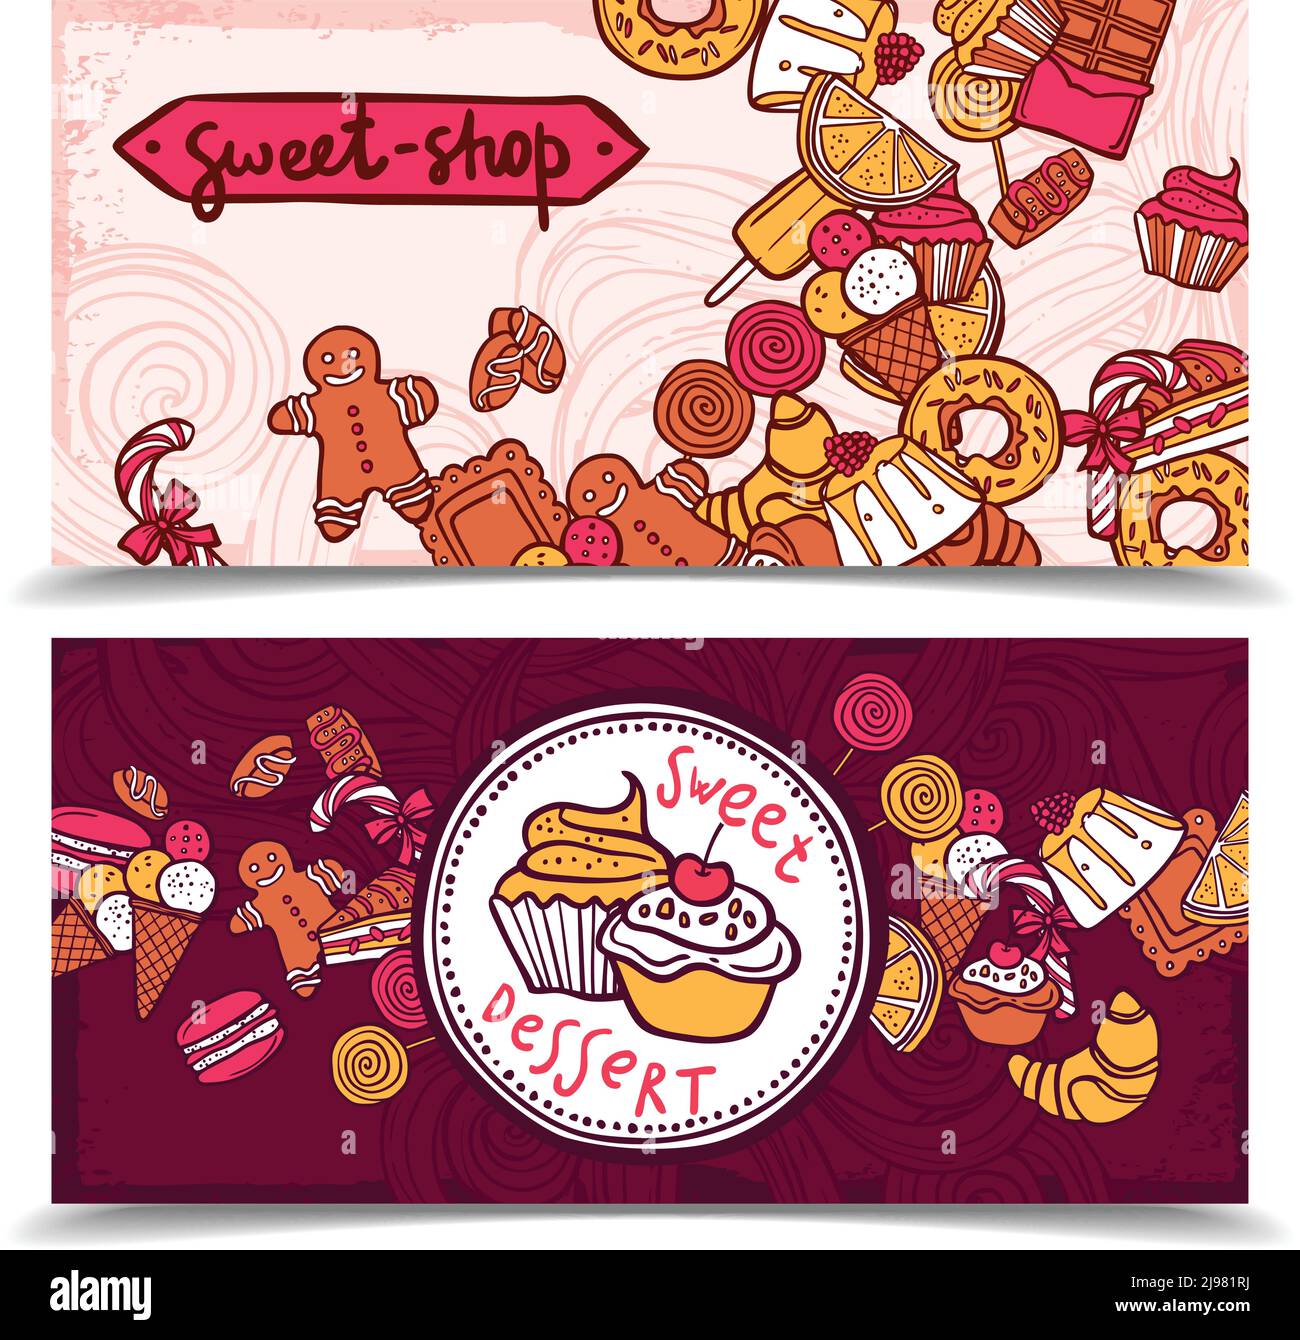 Sweetshop vintage chocolate cupcakes desserts confectionary store ginger boy cookies horizontal banners set abstract isolated vector illustration Stock Vector